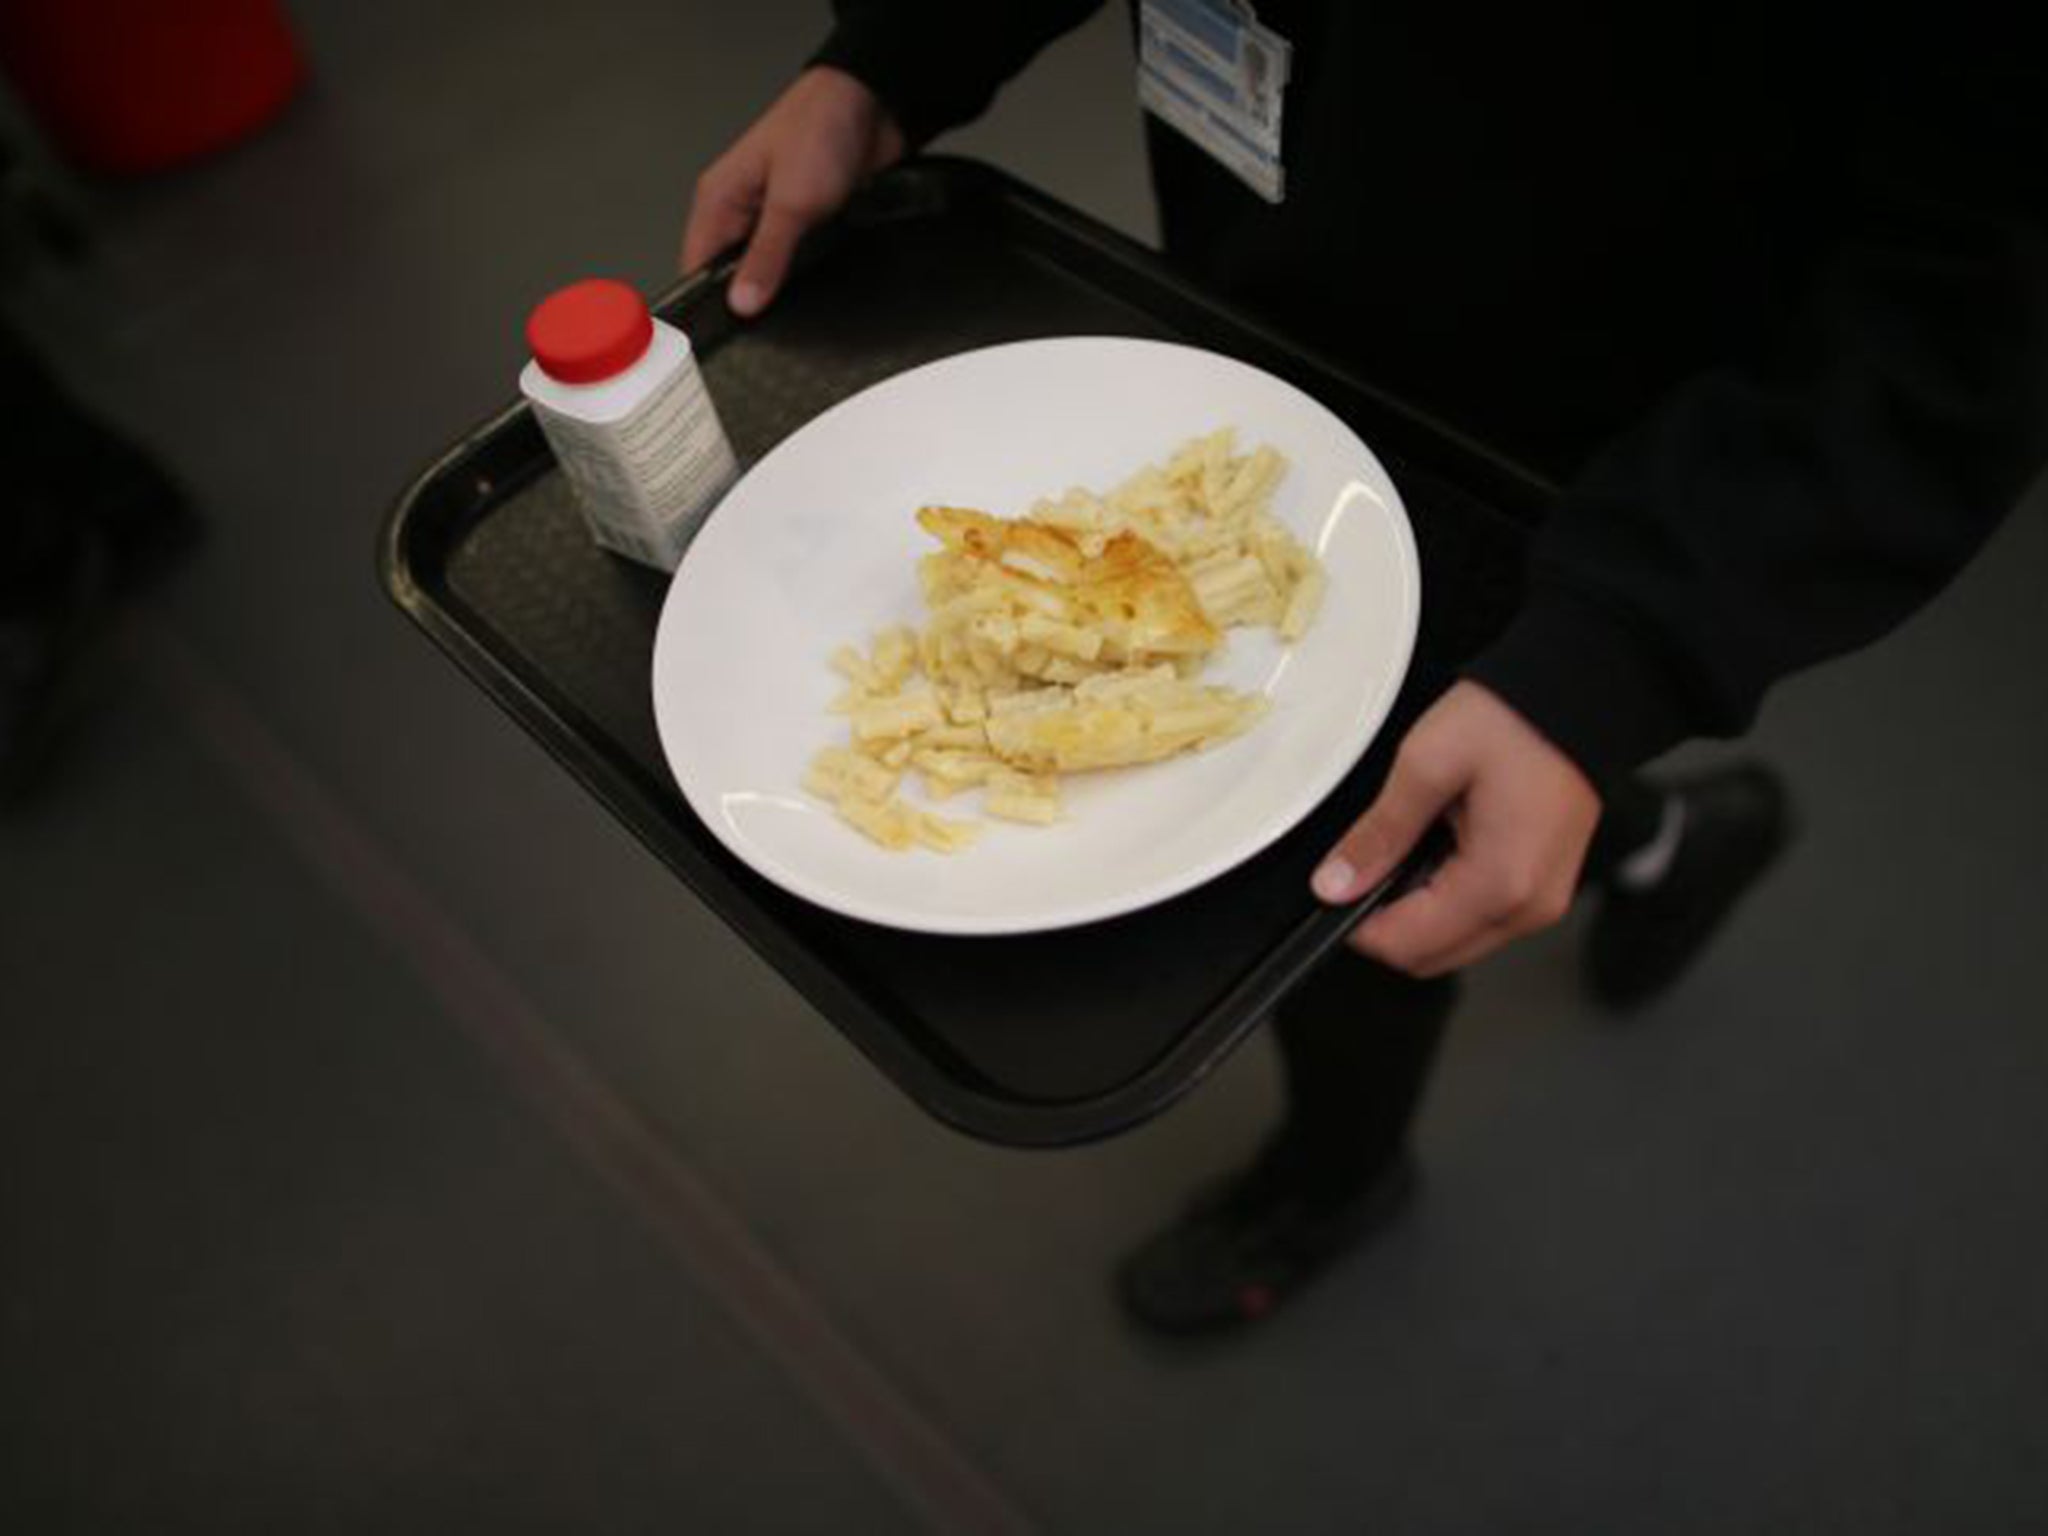 Labour intend to impose VAT on private school fees to fund free school meals for all primary school children